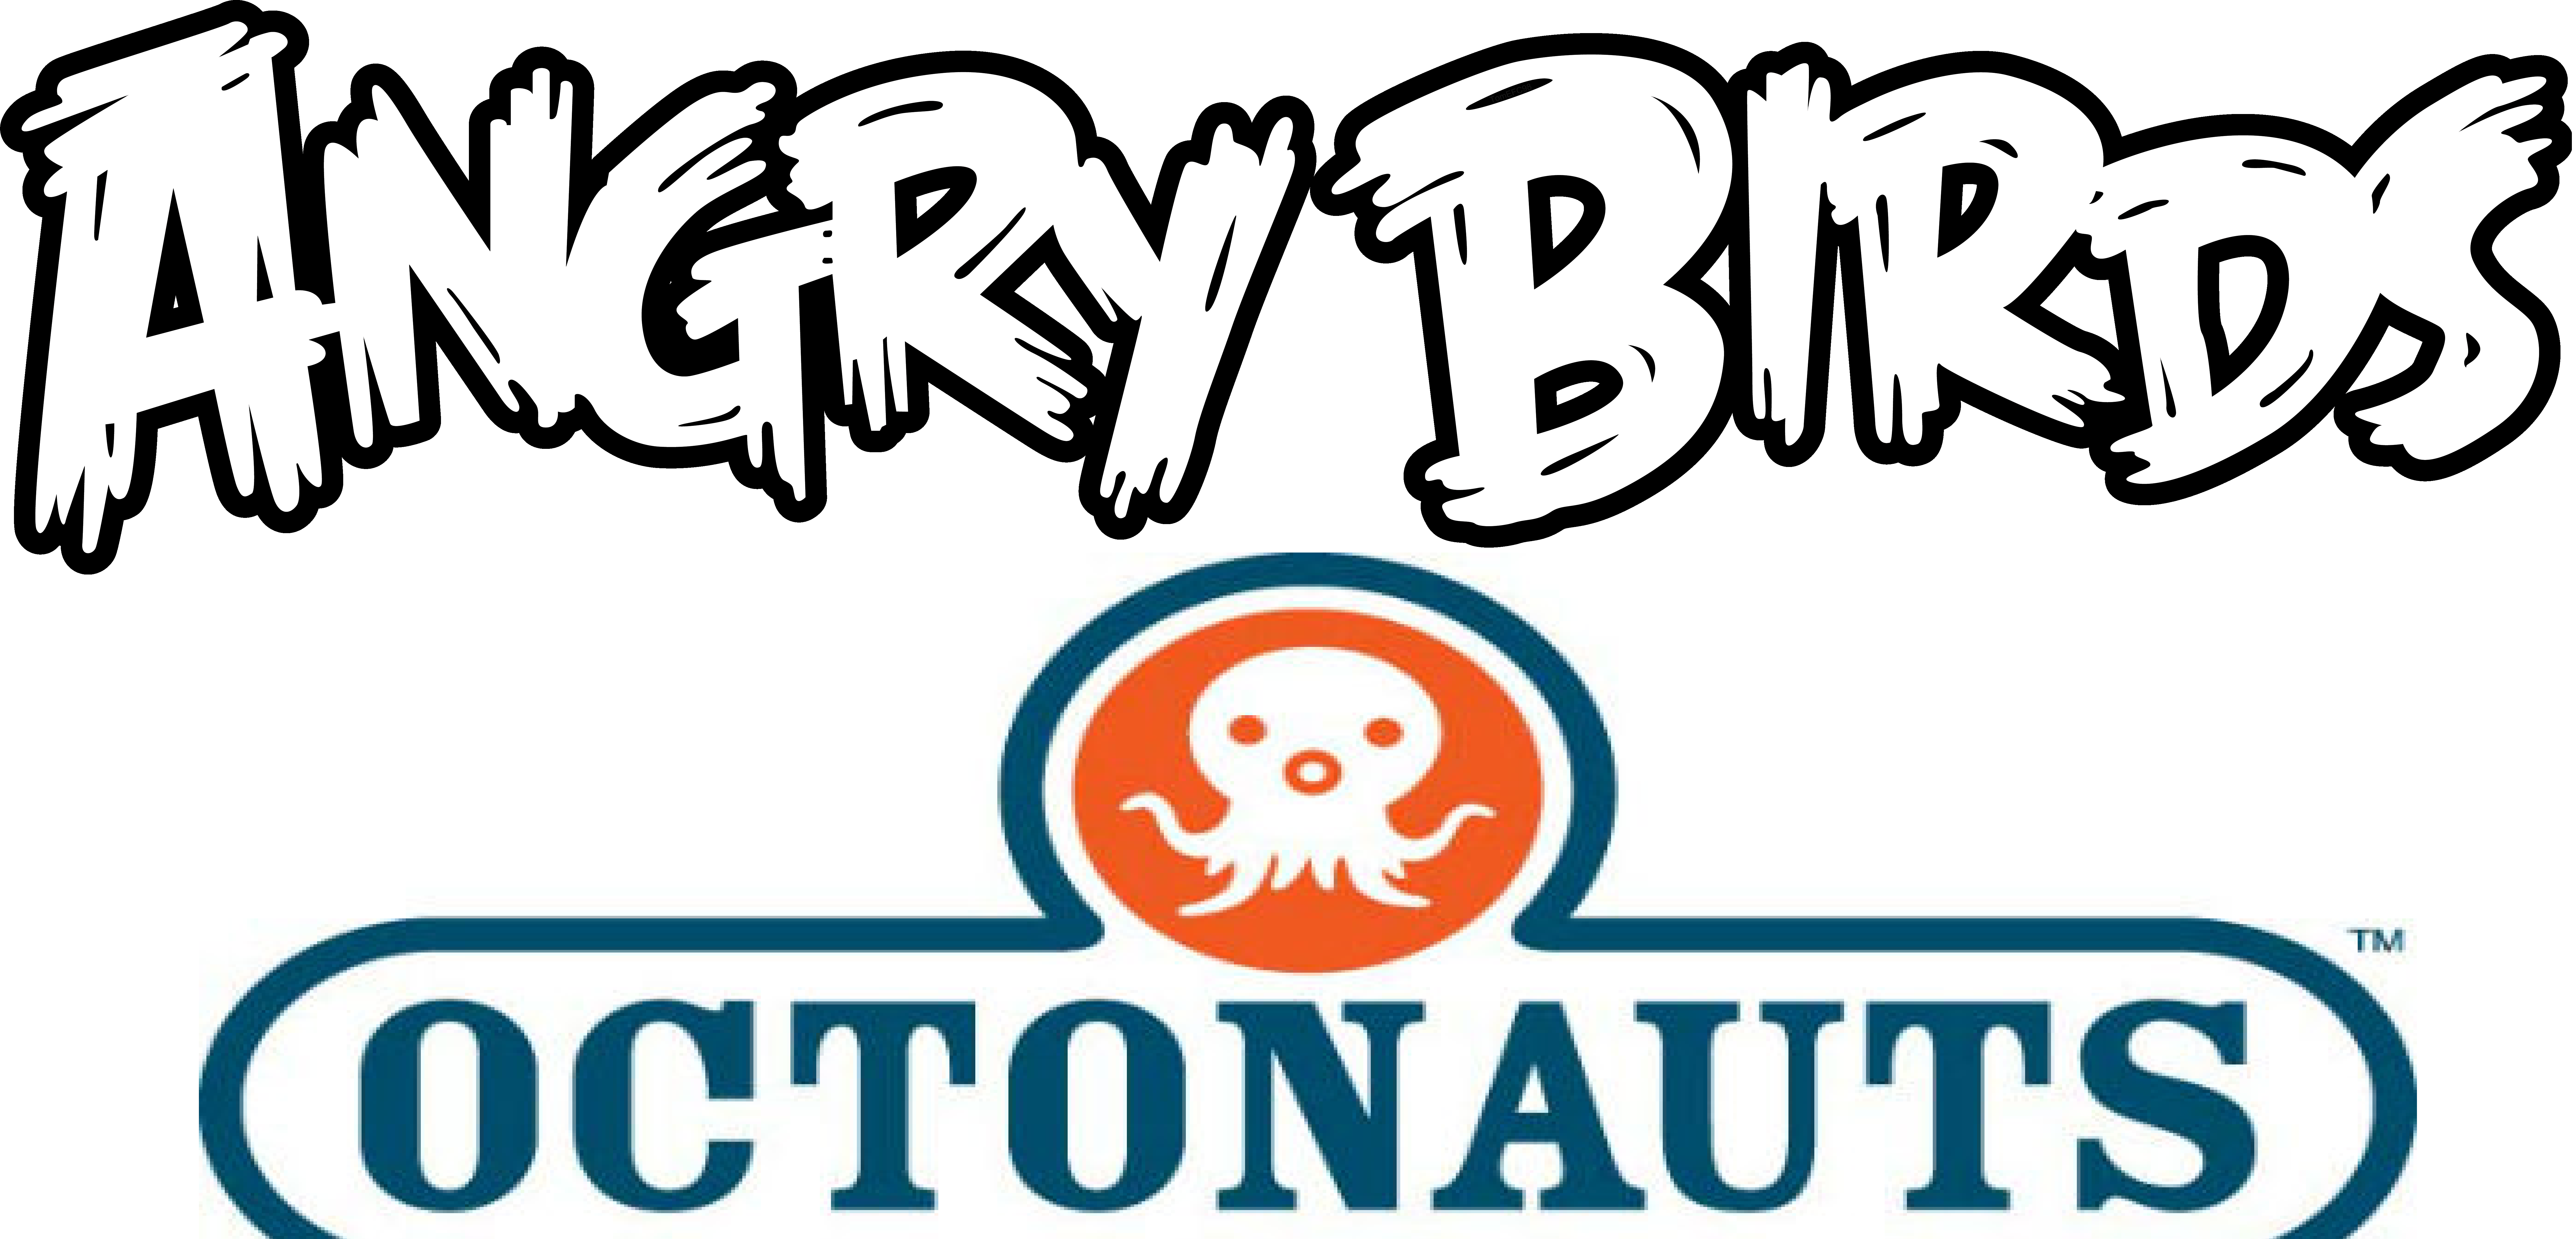 Image Angry birds octonauts logo.png Angry Birds Fanon Wiki